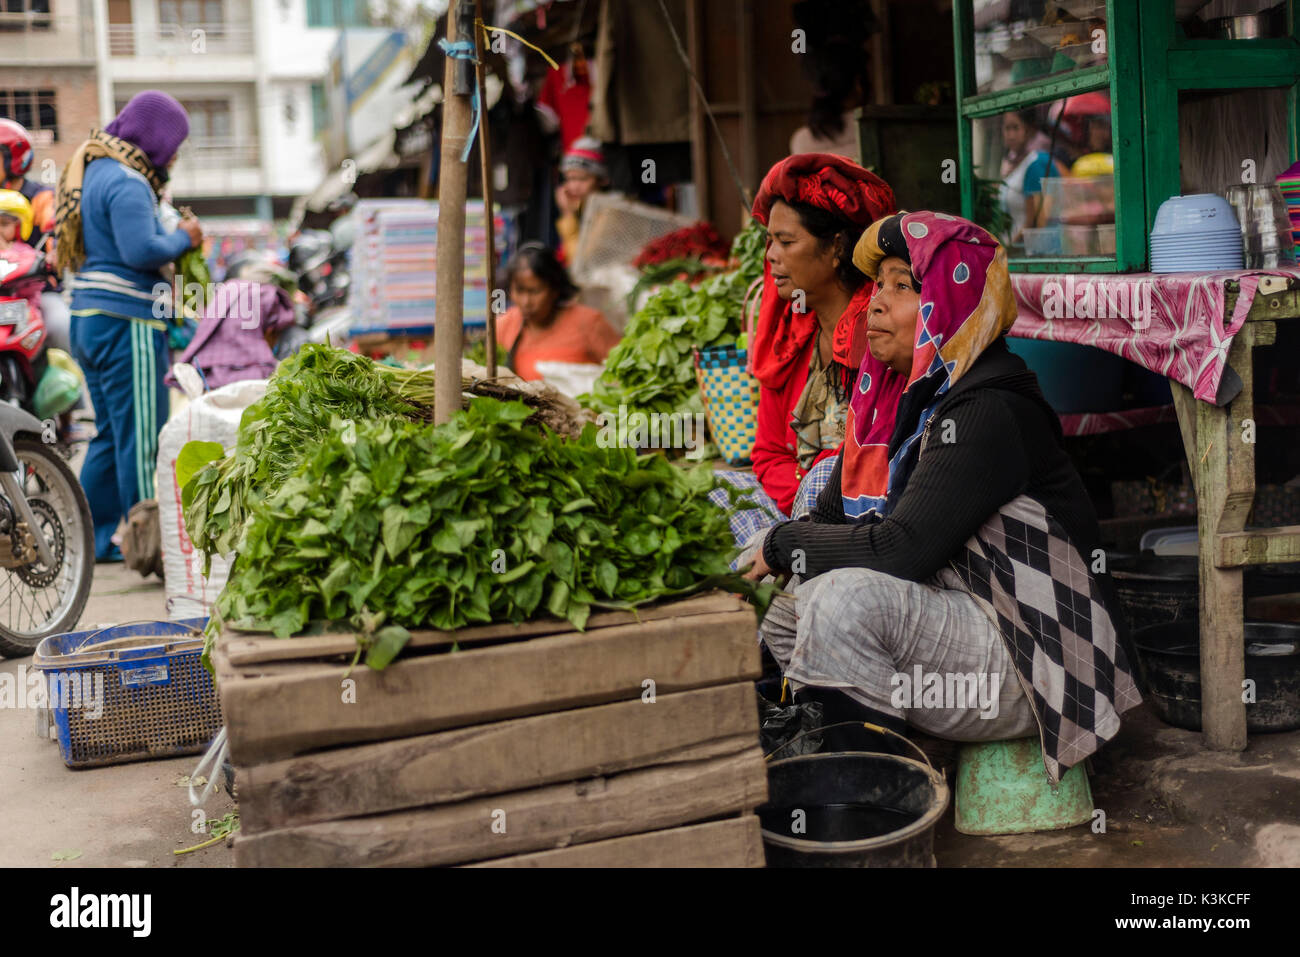 Two old market women in her vegetable stall, in traditional clothes of the Batak ethnic group. Recorded at the market in Berastagi on Sumatra, Indonesia. Stock Photo